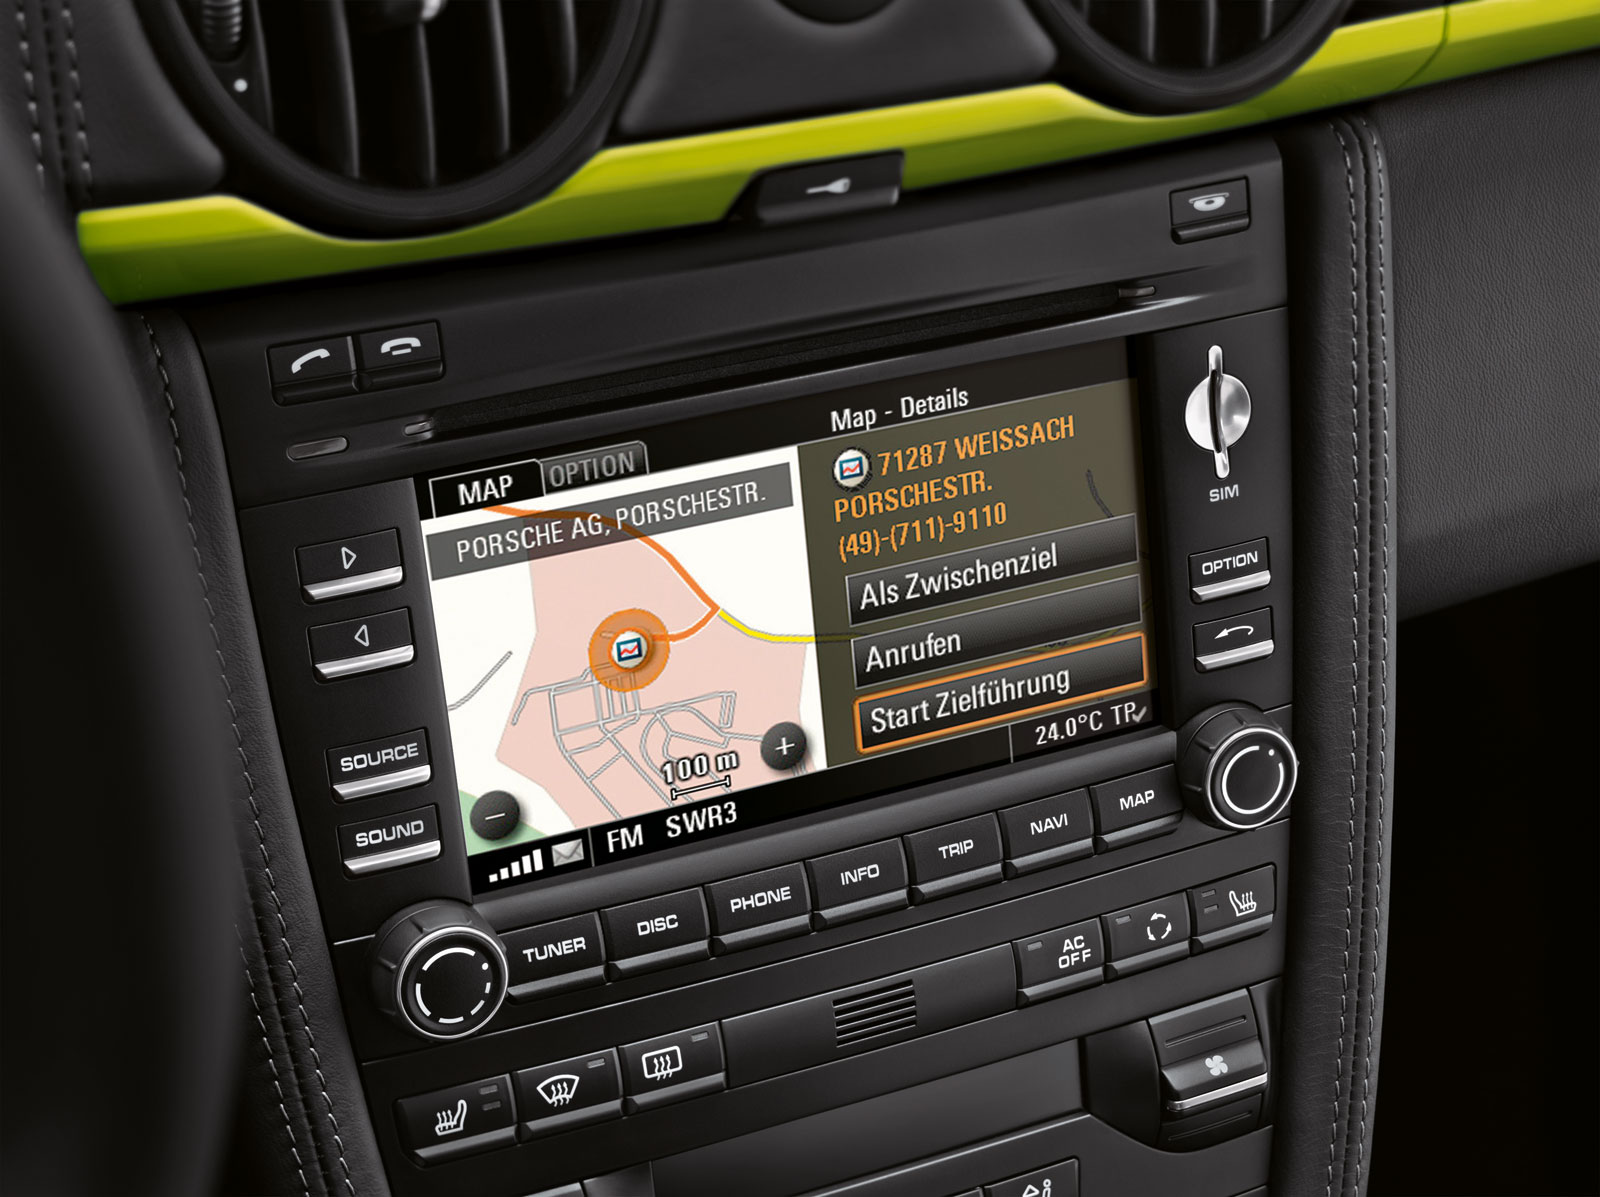 Is in-dash GPS installation an easy task